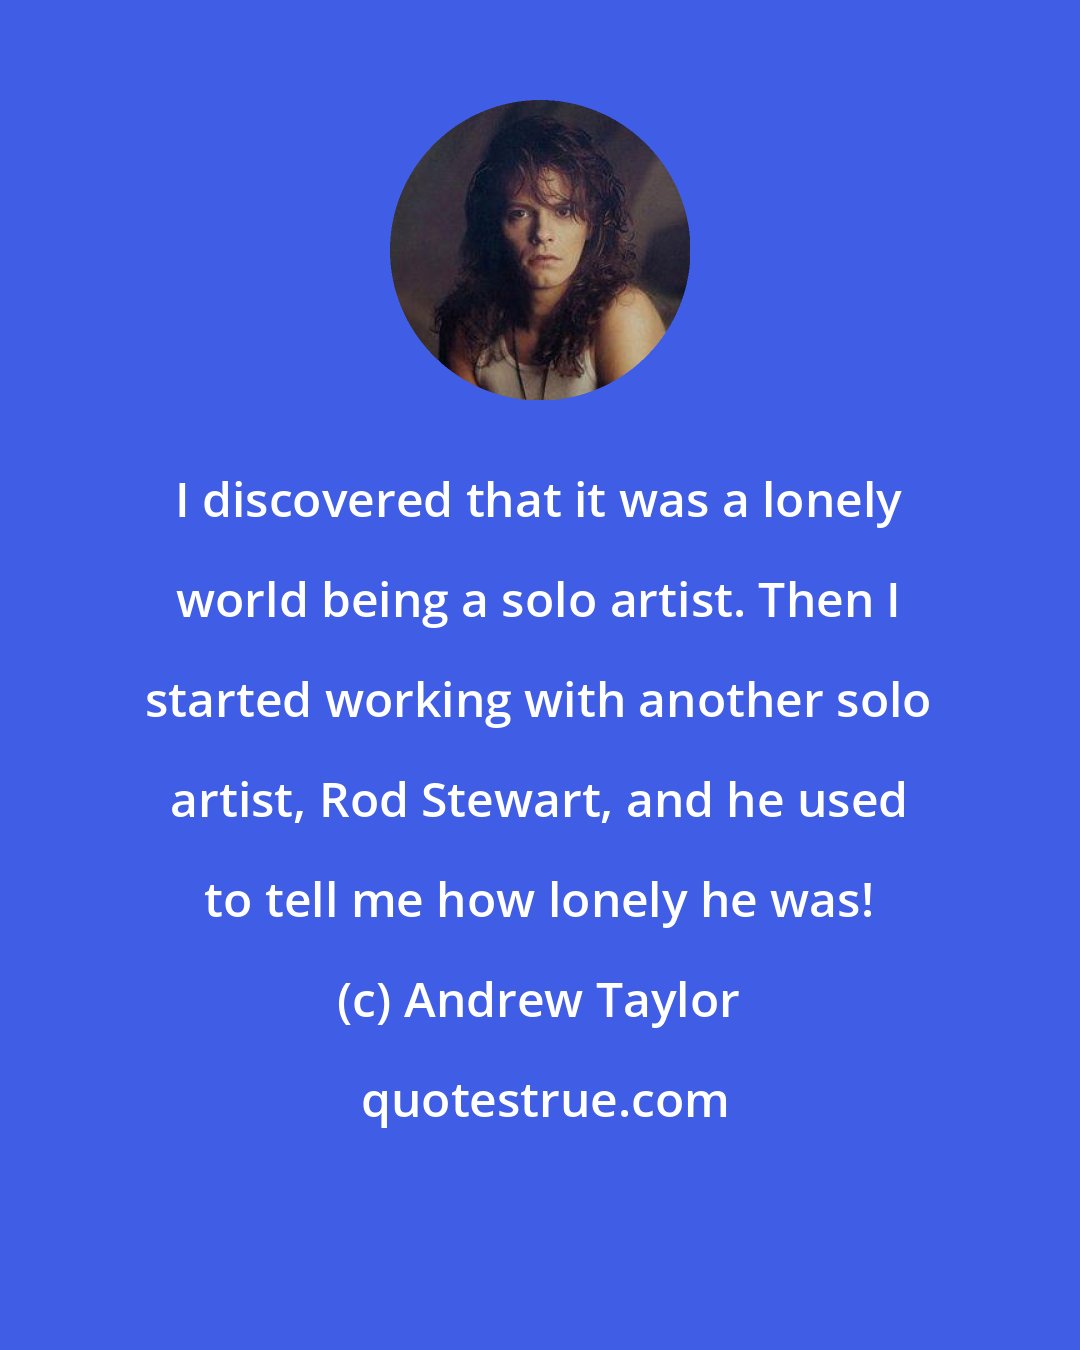 Andrew Taylor: I discovered that it was a lonely world being a solo artist. Then I started working with another solo artist, Rod Stewart, and he used to tell me how lonely he was!